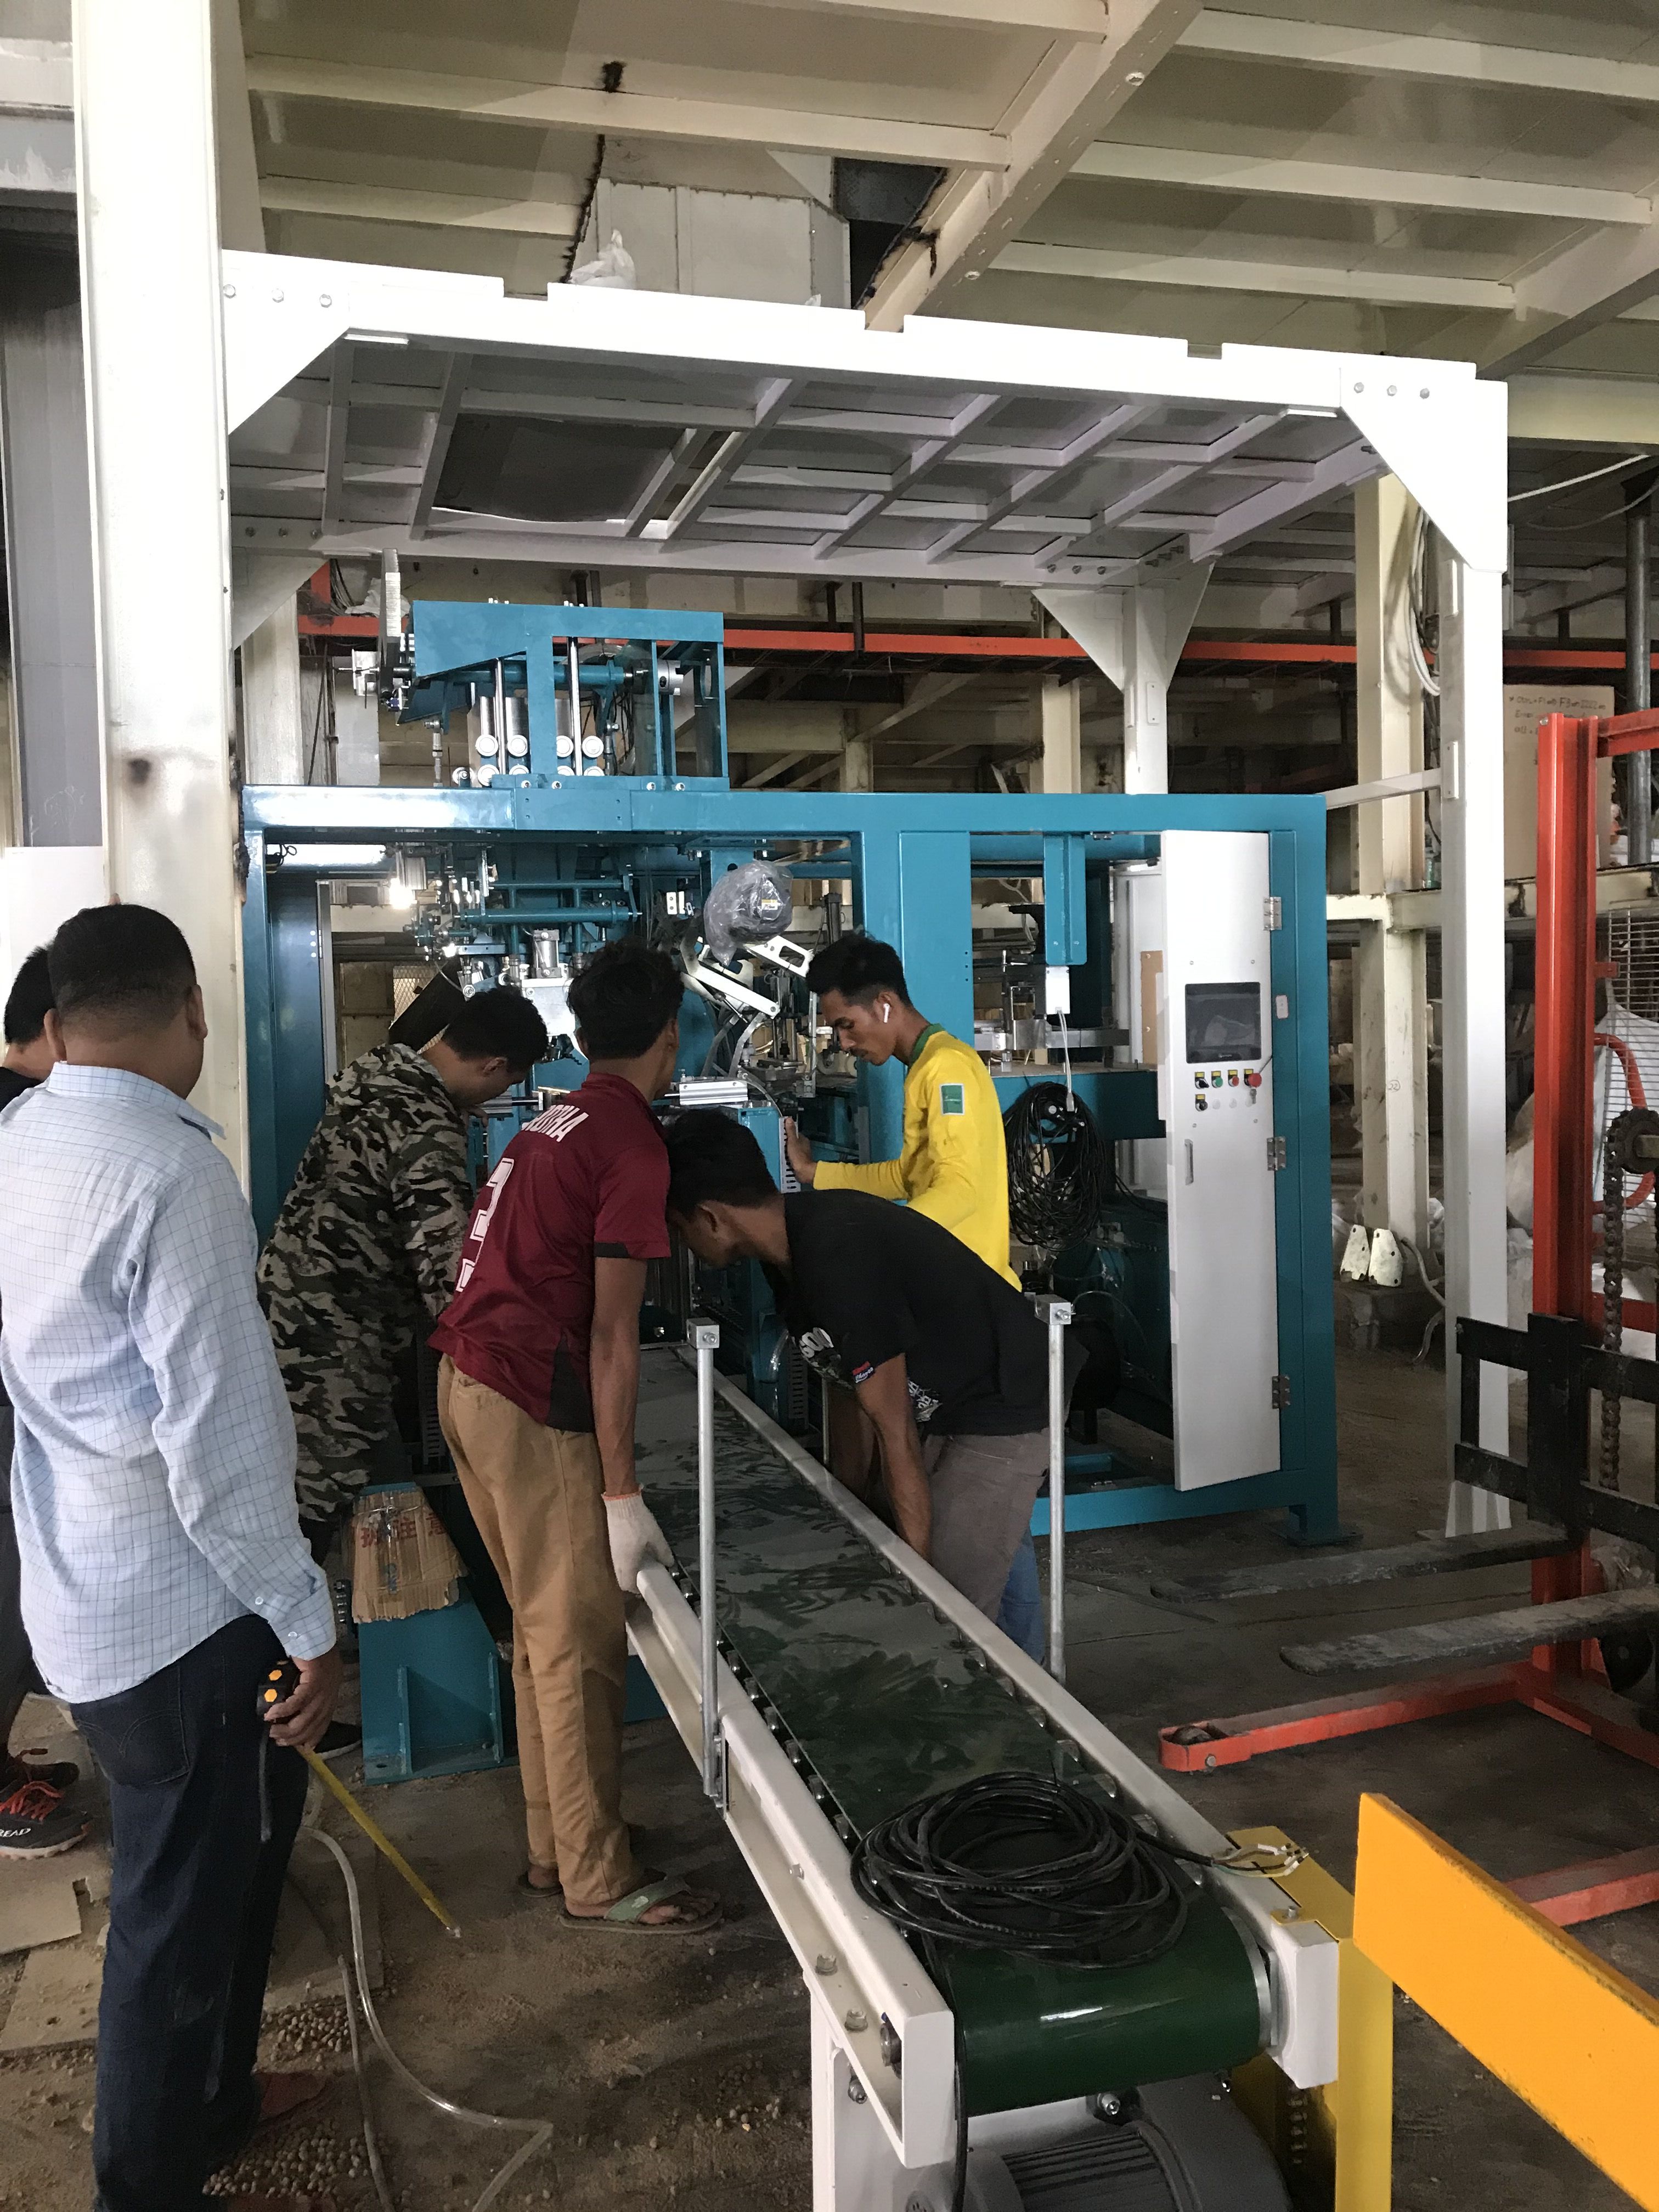 25 kg bagger Fully Automatic Packaging machine for 25 kgs bag Bagging 50Kg Bag And Palletising Machine Automatic bag weighing and packaging equipment Robotic palletizing equipment packaging equipment 